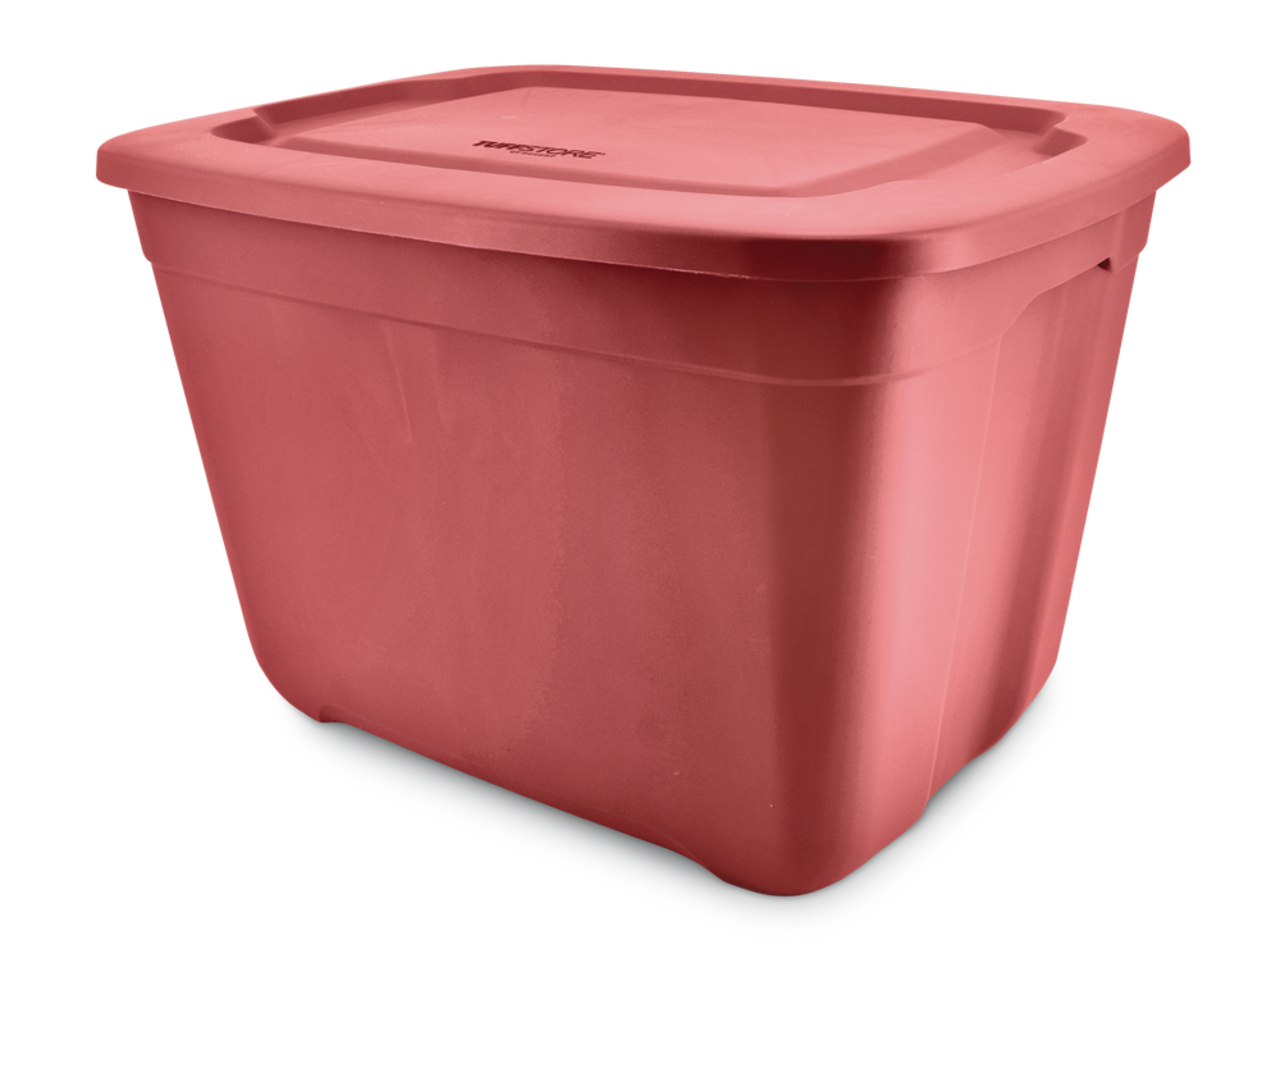  Bandage Box Container, Red with White Center : Health &  Household